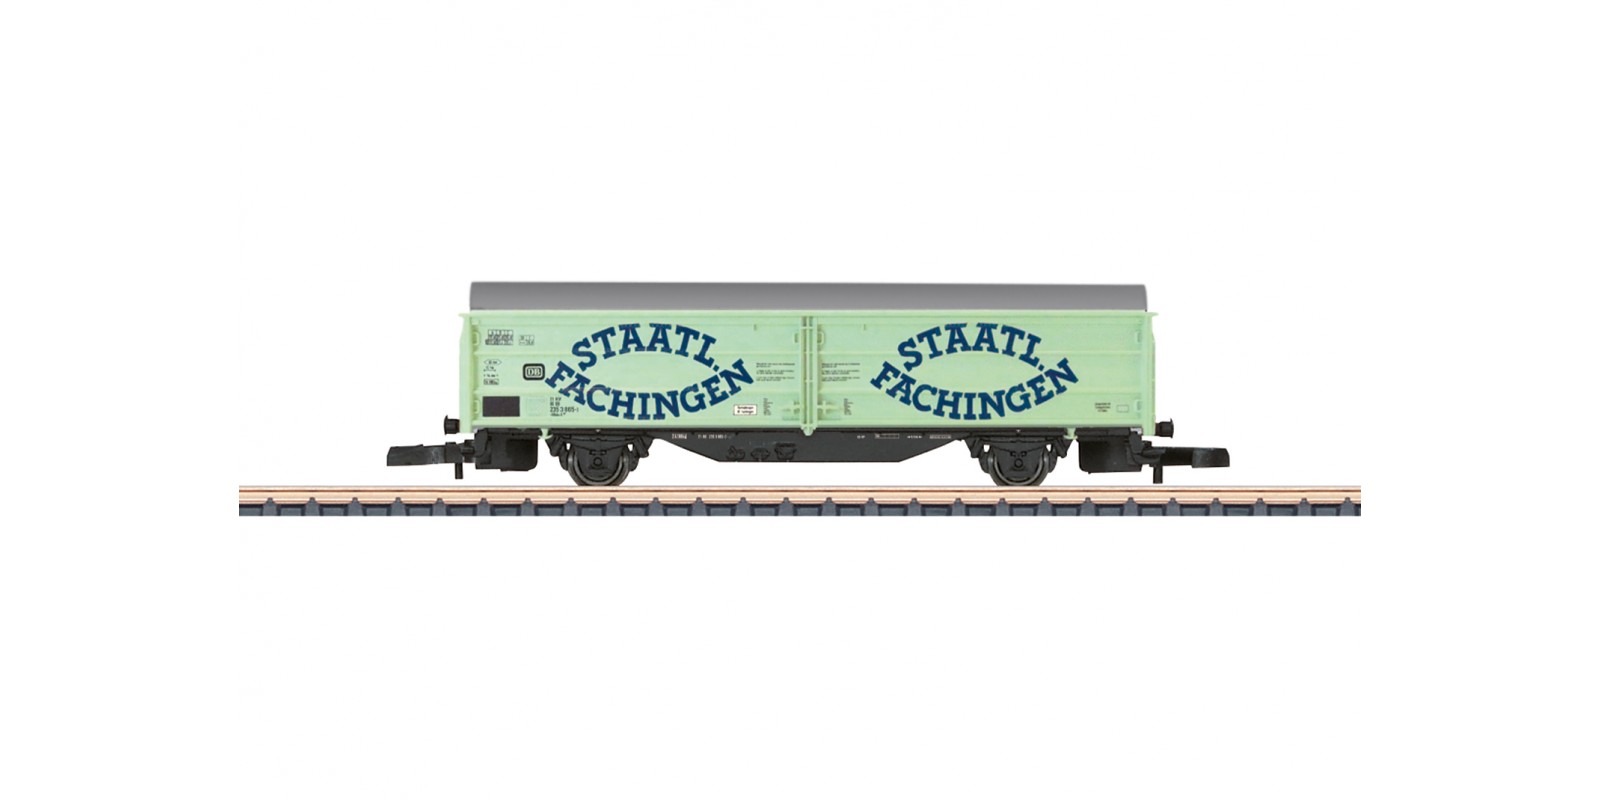 82156 Type Hbis-t 299 Sliding Wall Boxcar